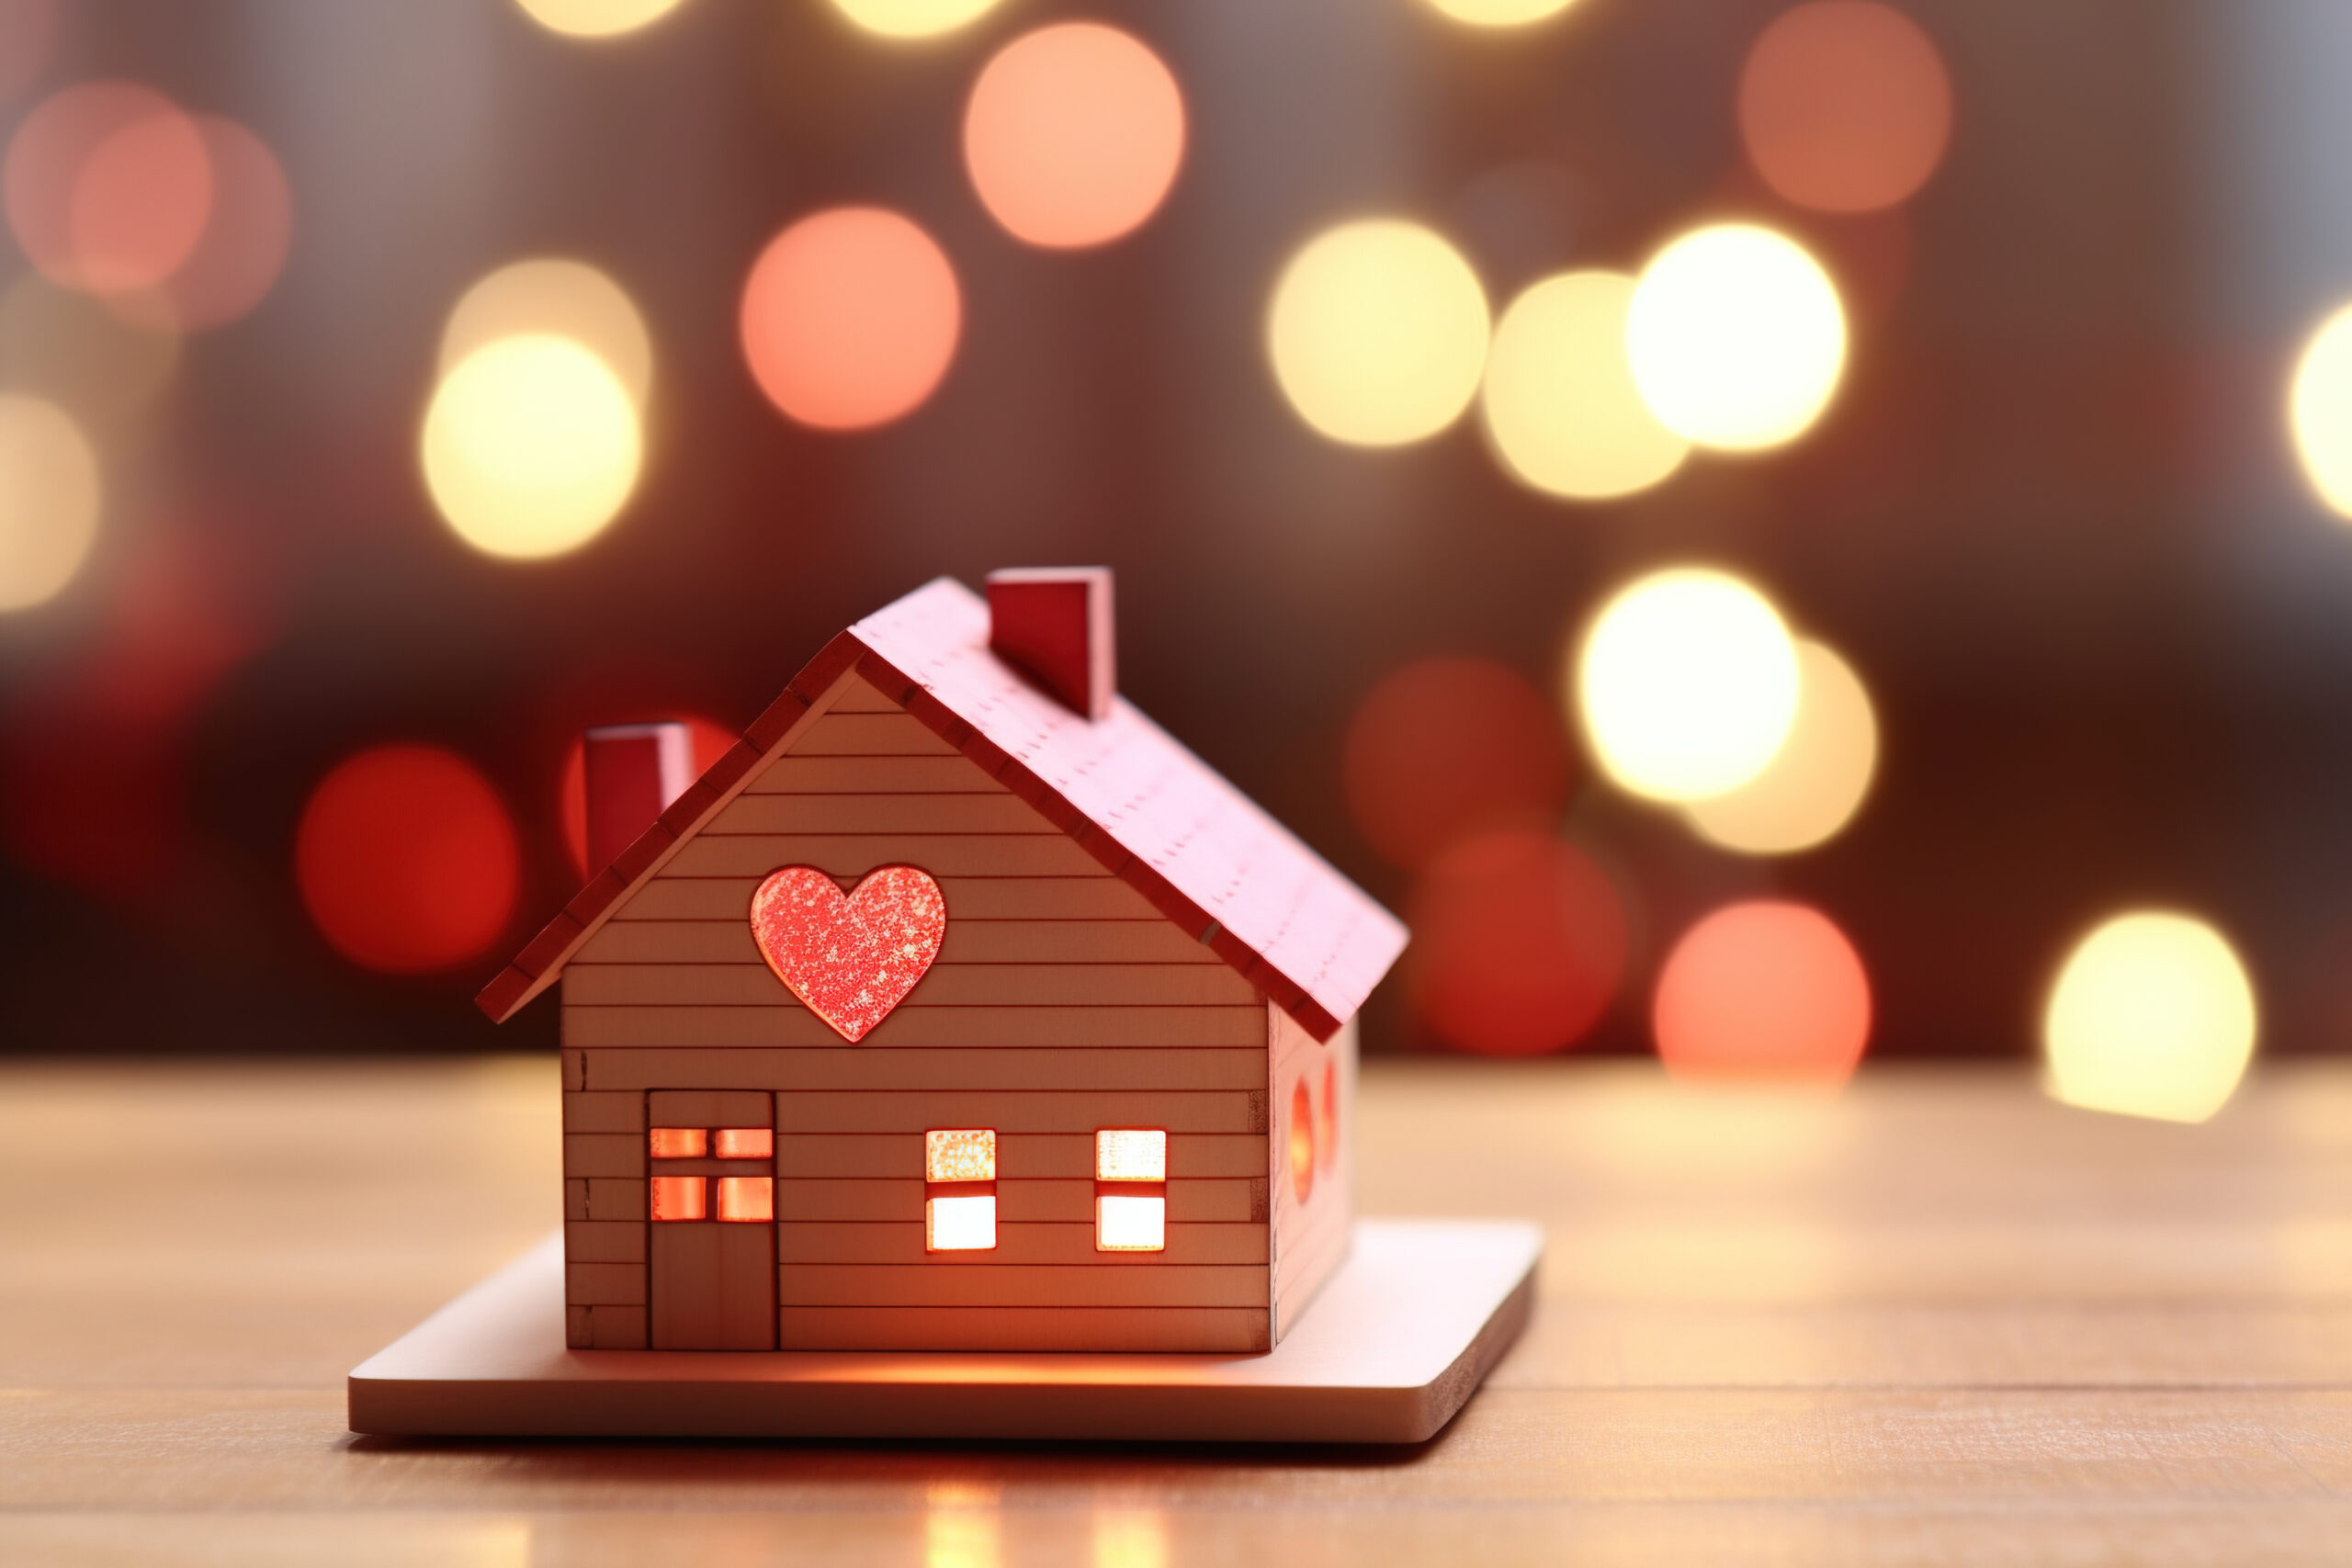 Happy Valentine's! How about a home renovation for your loved one?